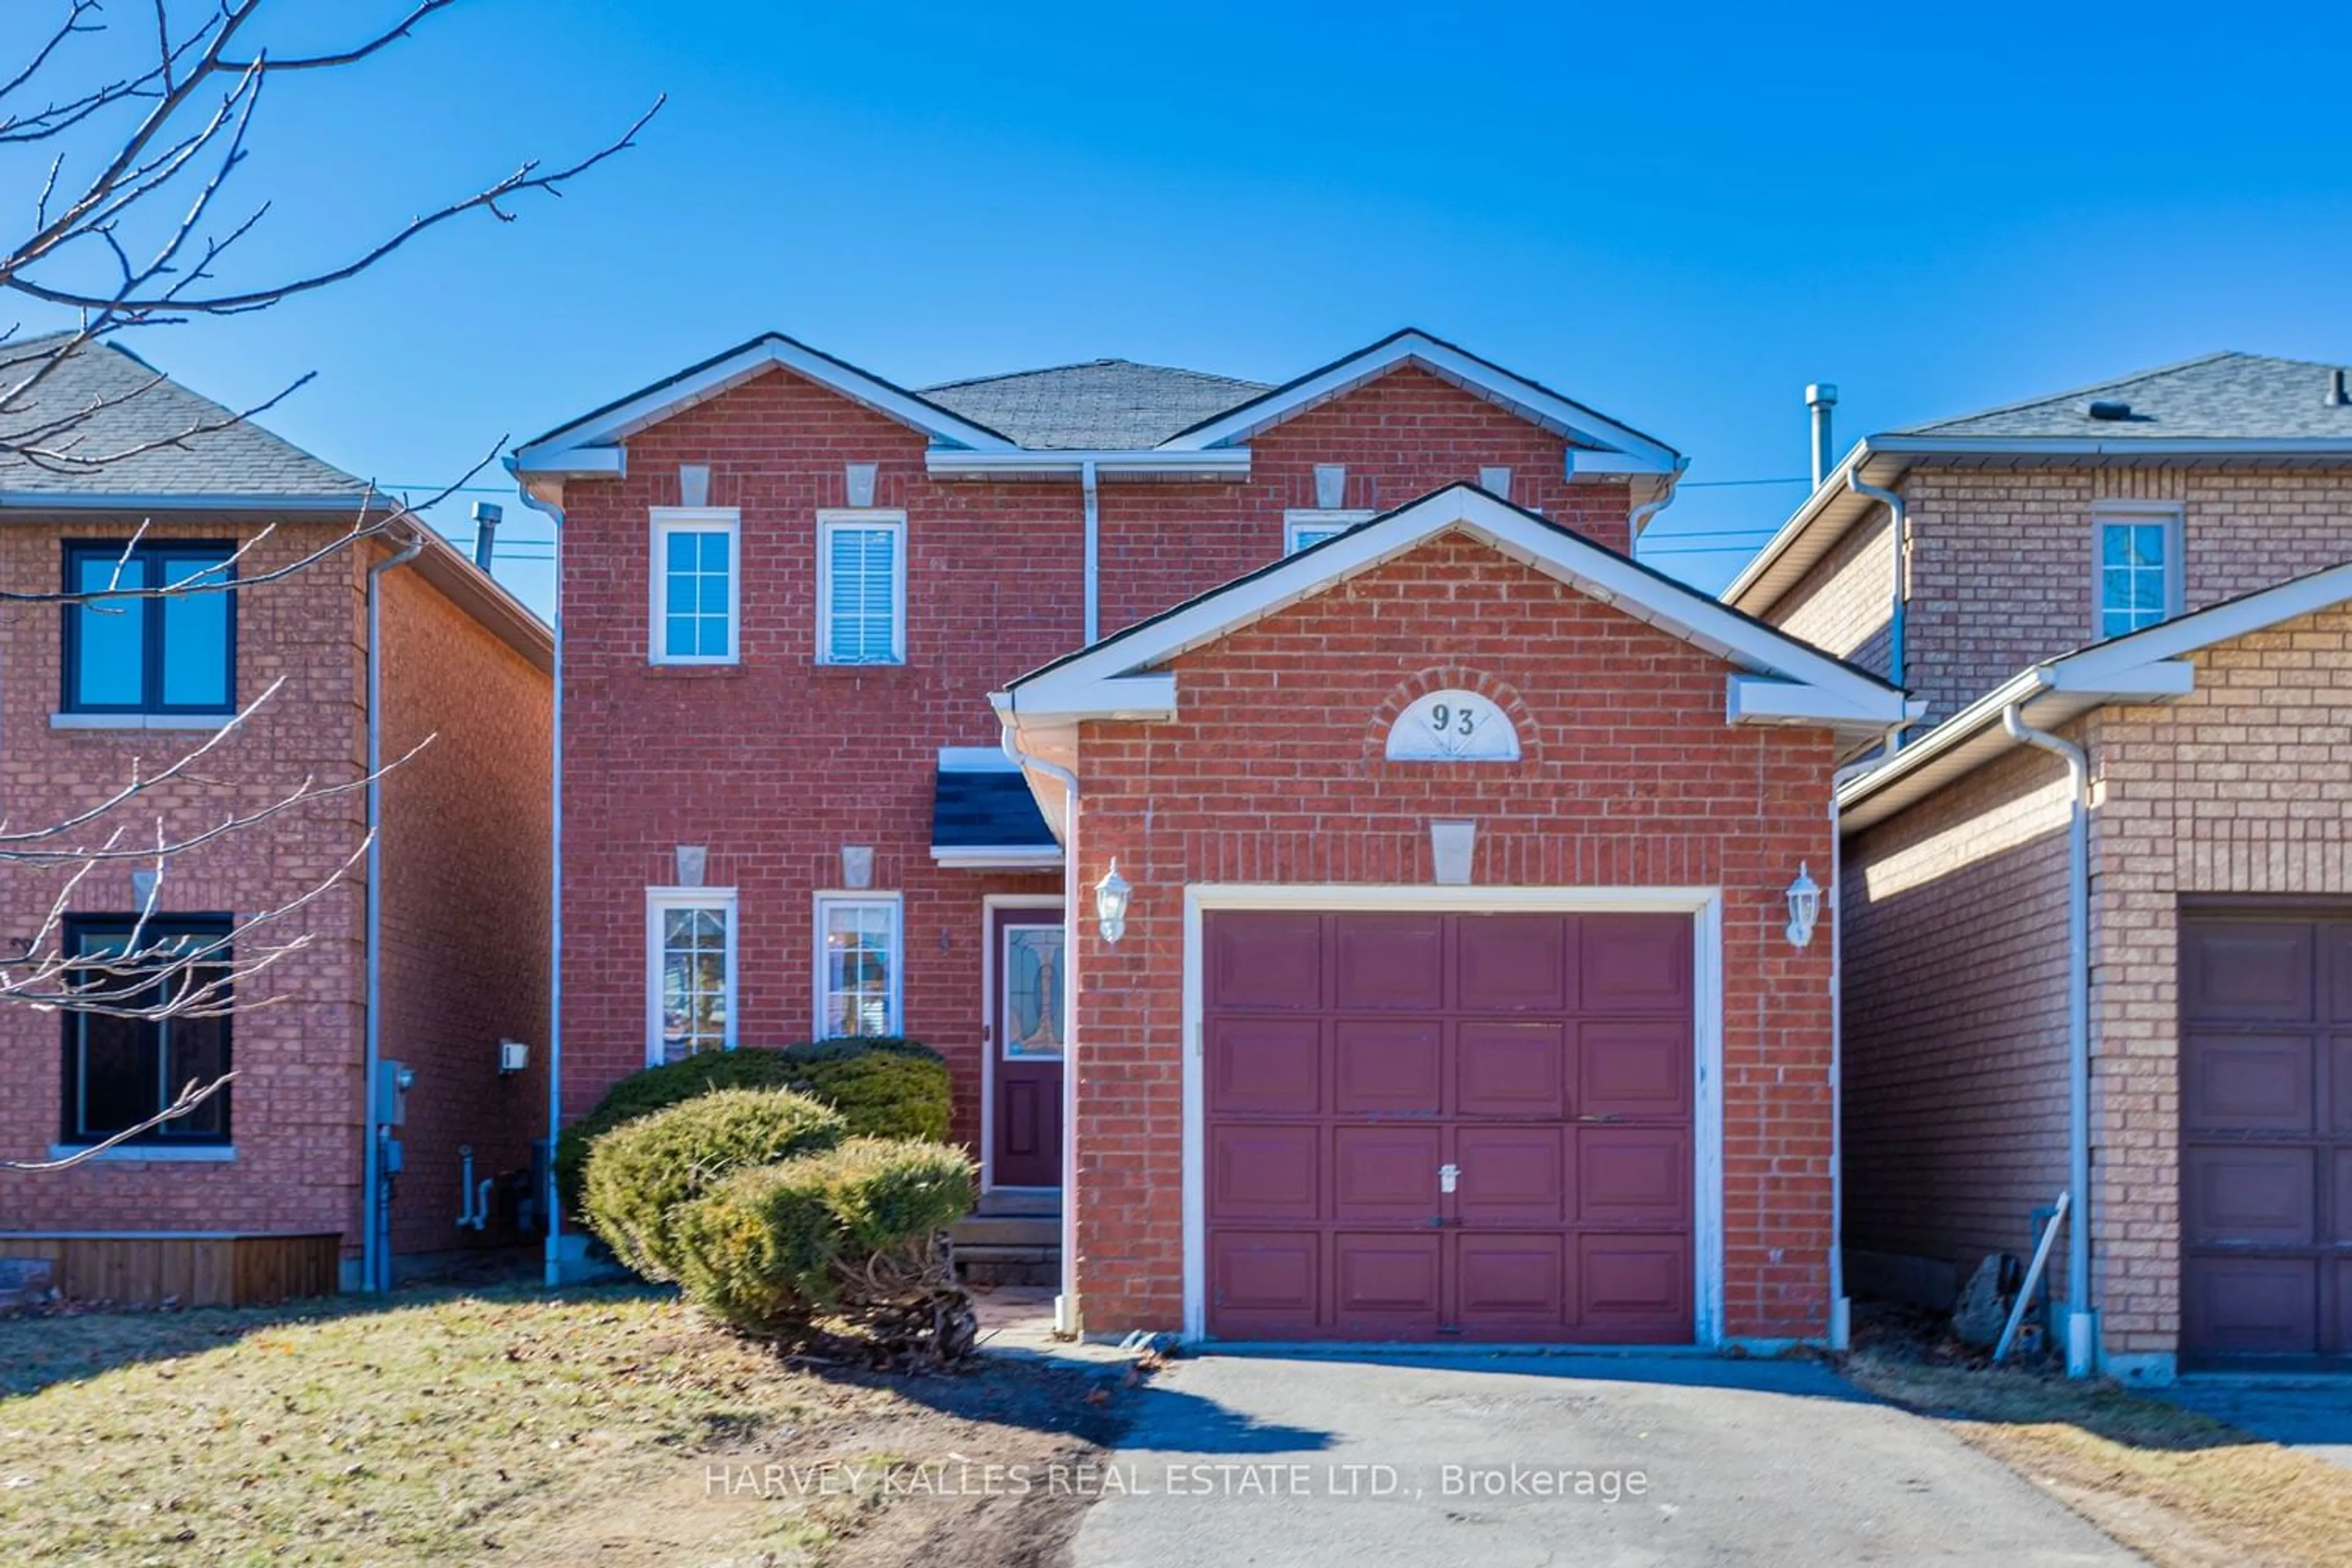 Home with brick exterior material for 93 Old Colony Dr, Whitby Ontario L1R 2G9